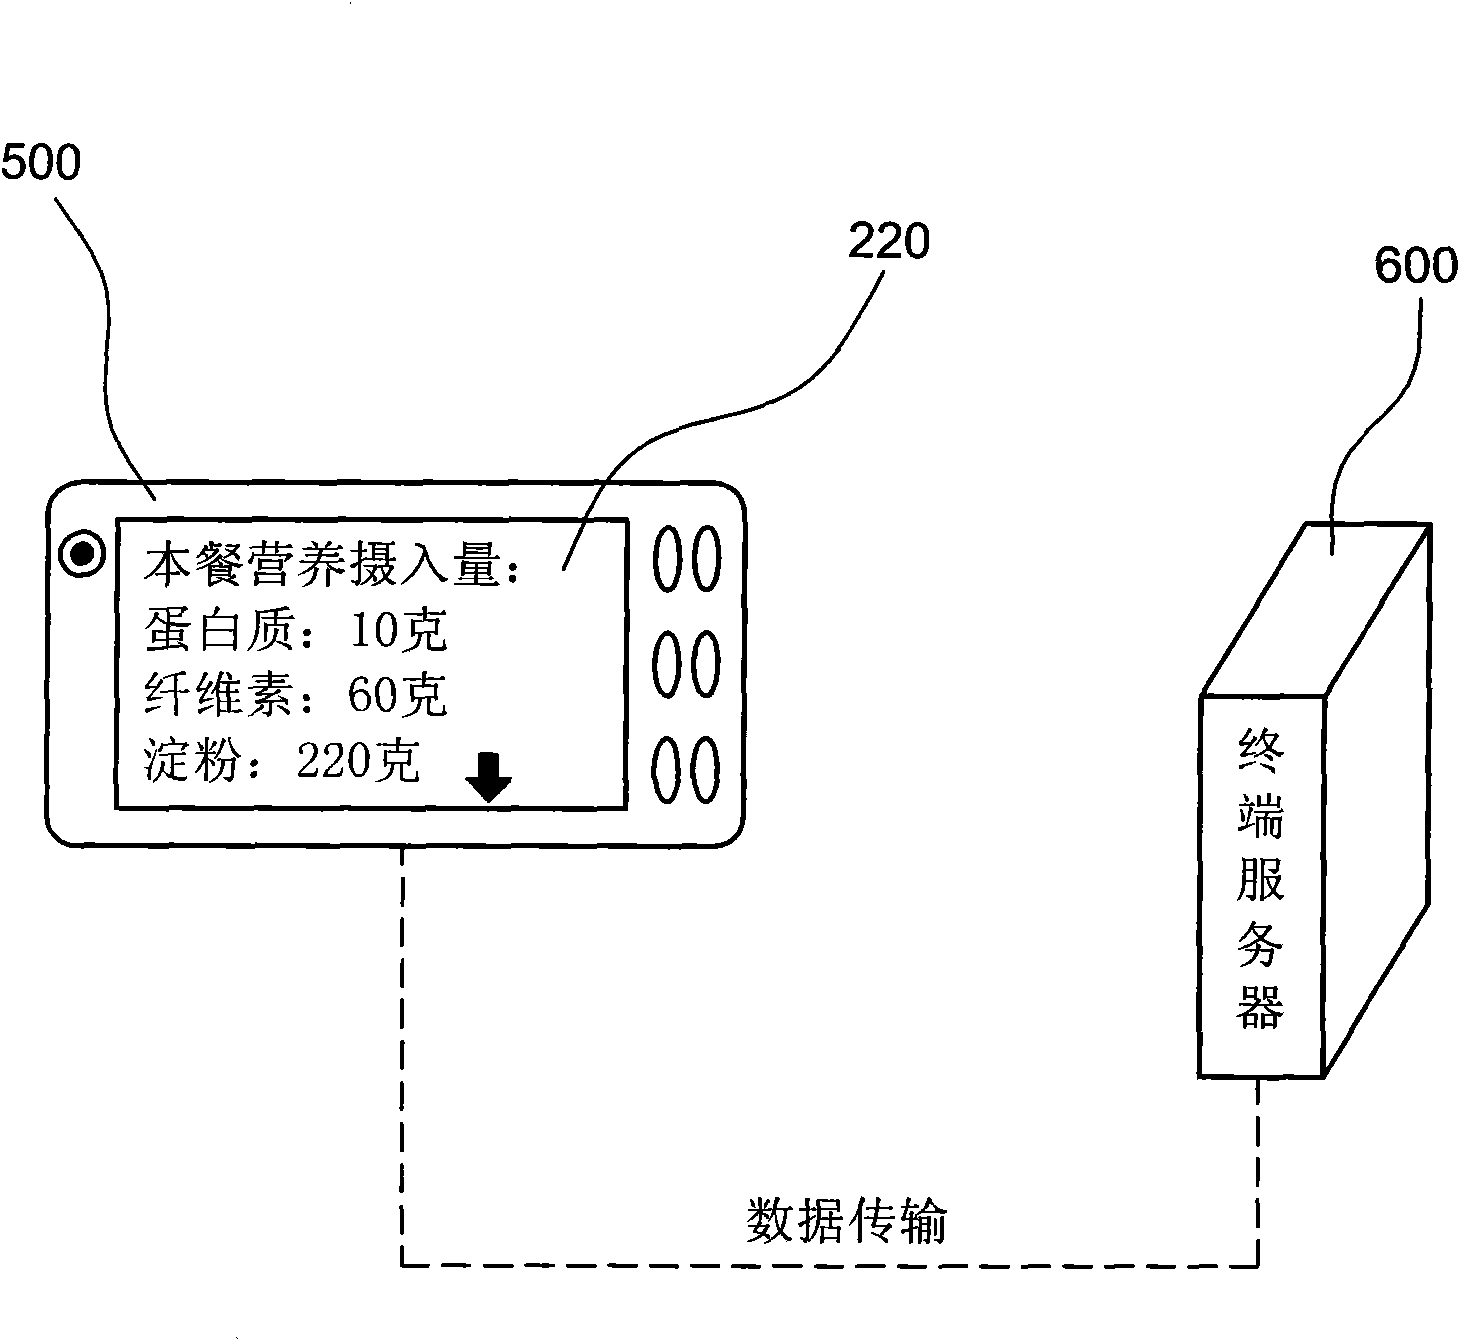 Method and system for calculating human nutrition intake by using shooting principle